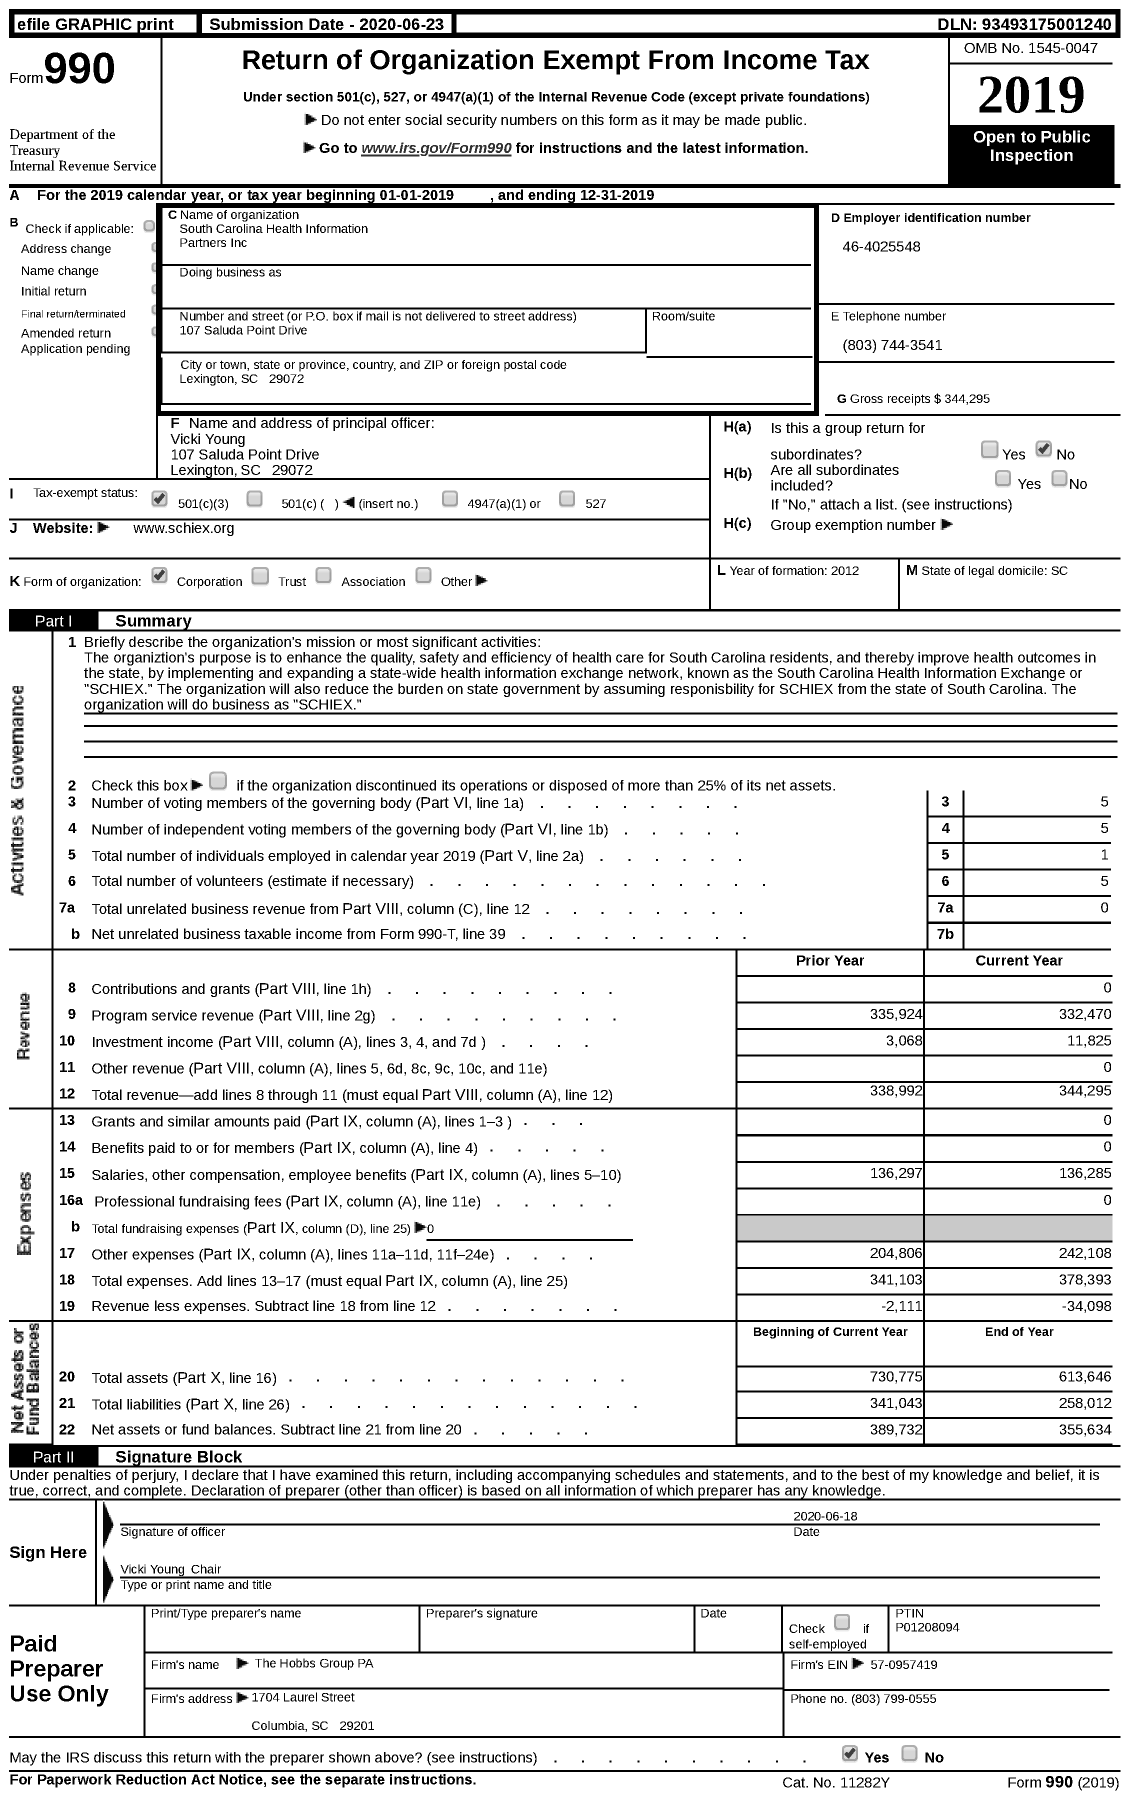 Image of first page of 2019 Form 990 for South Carolina Health Information Partners